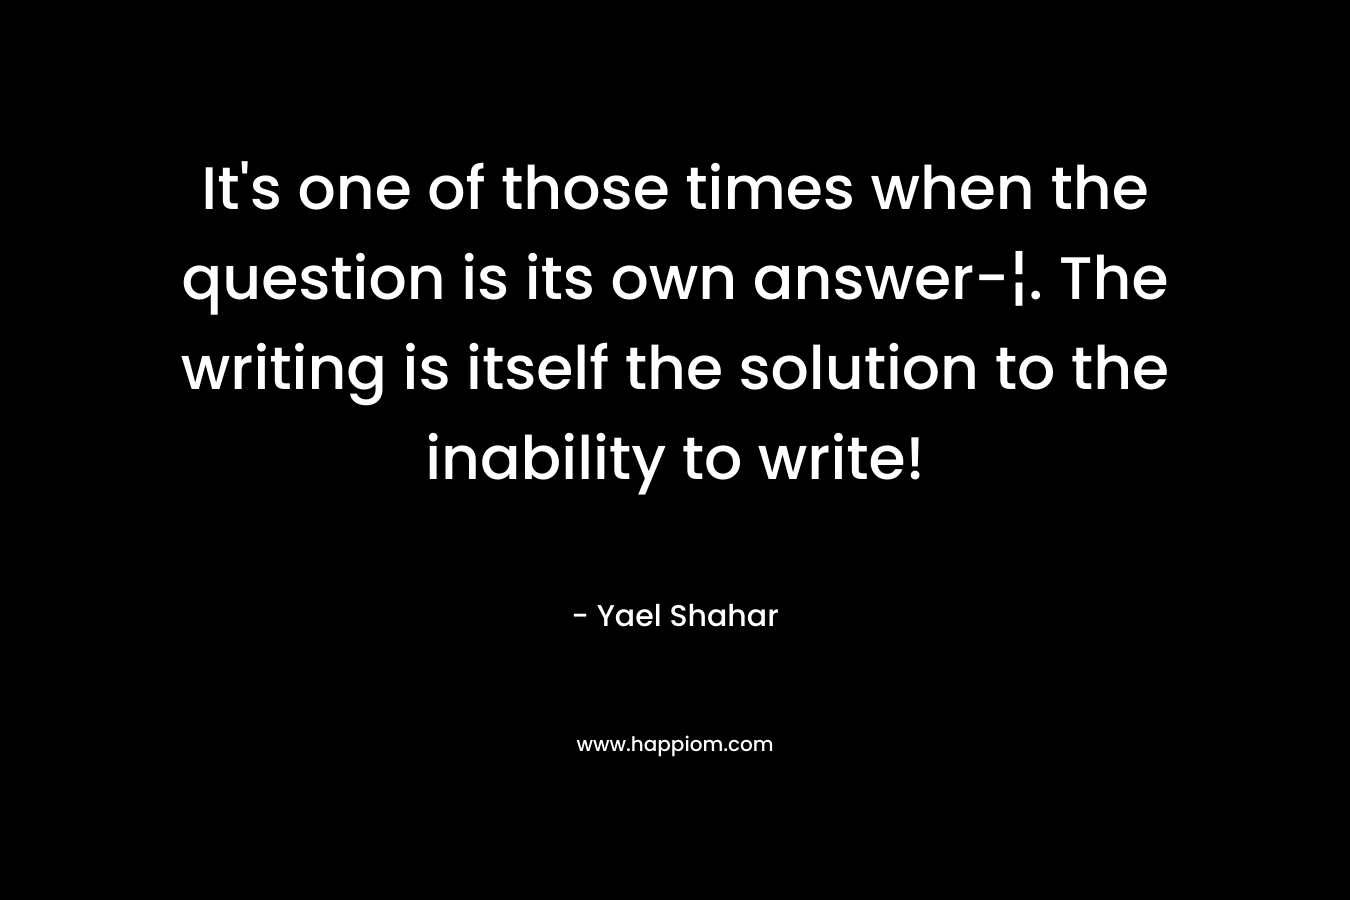 It's one of those times when the question is its own answer-¦. The writing is itself the solution to the inability to write!